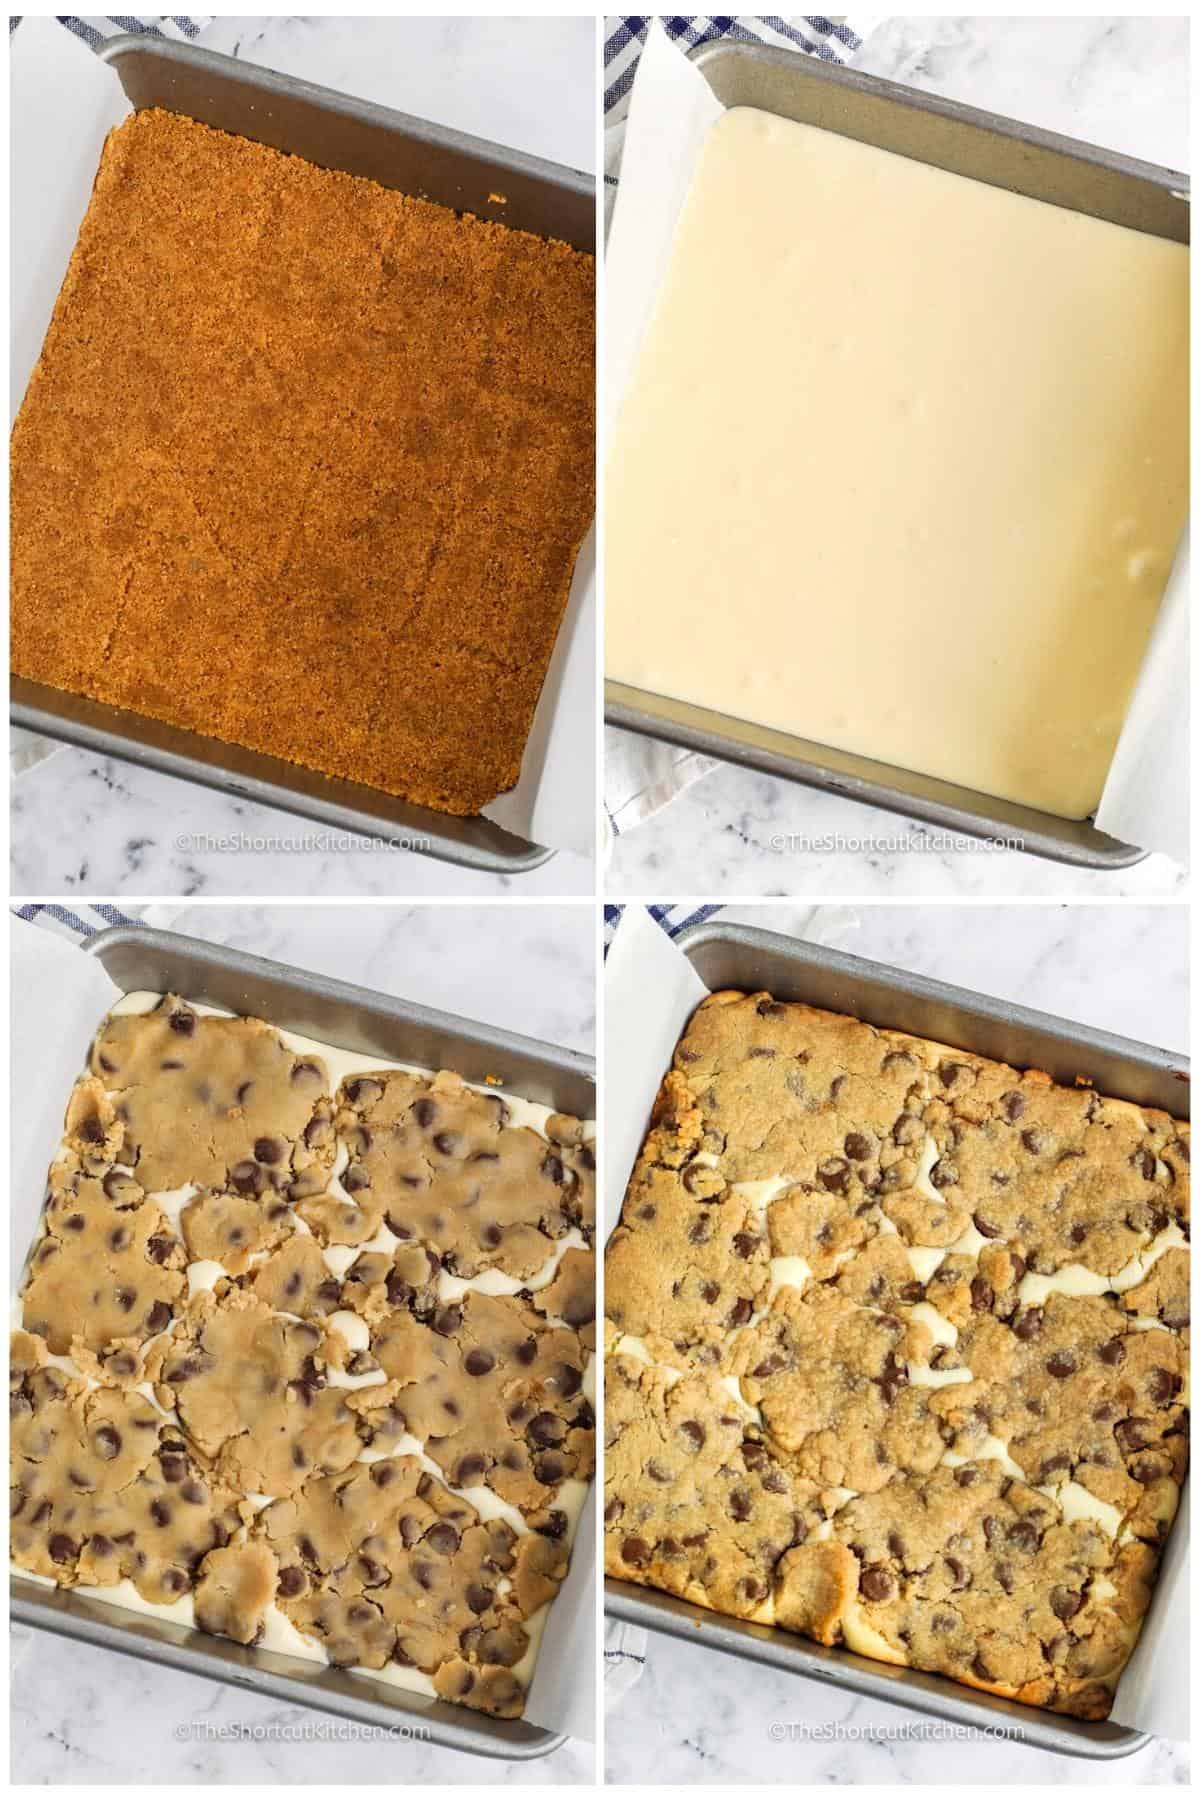 process of adding ingredients together to make Chocolate Chip Cheesecake Bars